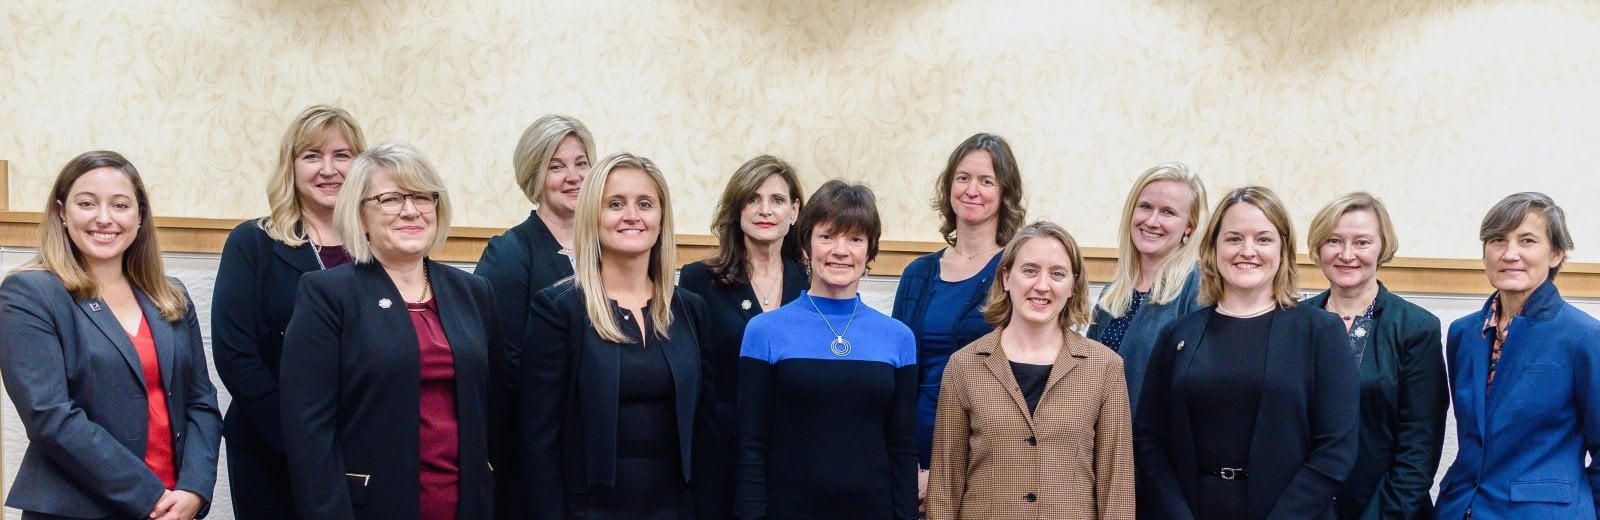 Michigan Techâ€™s Presidential Council of Alumnae (PCA) honors some of Techâ€™s most successful women alumnae and recognizes them for their personal and professional achievements.